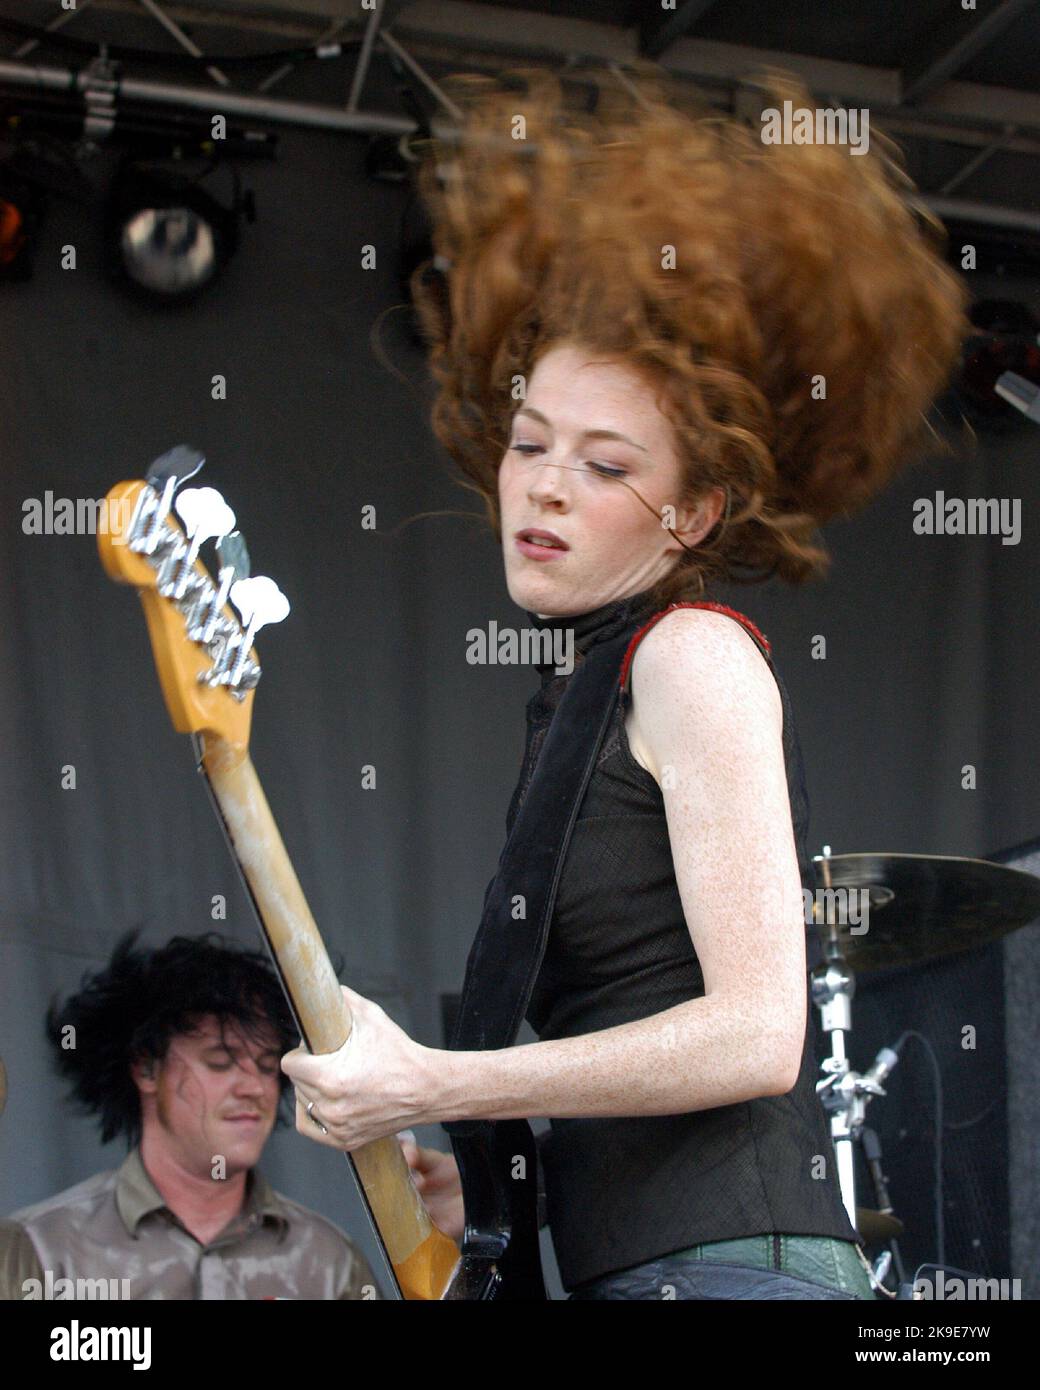 Melissa Auf der Maur performs at the fourth date of the Curiosa Festival tour on July 29, 2004 at Atlanta, Georgia's Hi-Fi Buys Amphitheatre. CREDIT: Chris McKay / MediaPunch Stock Photo